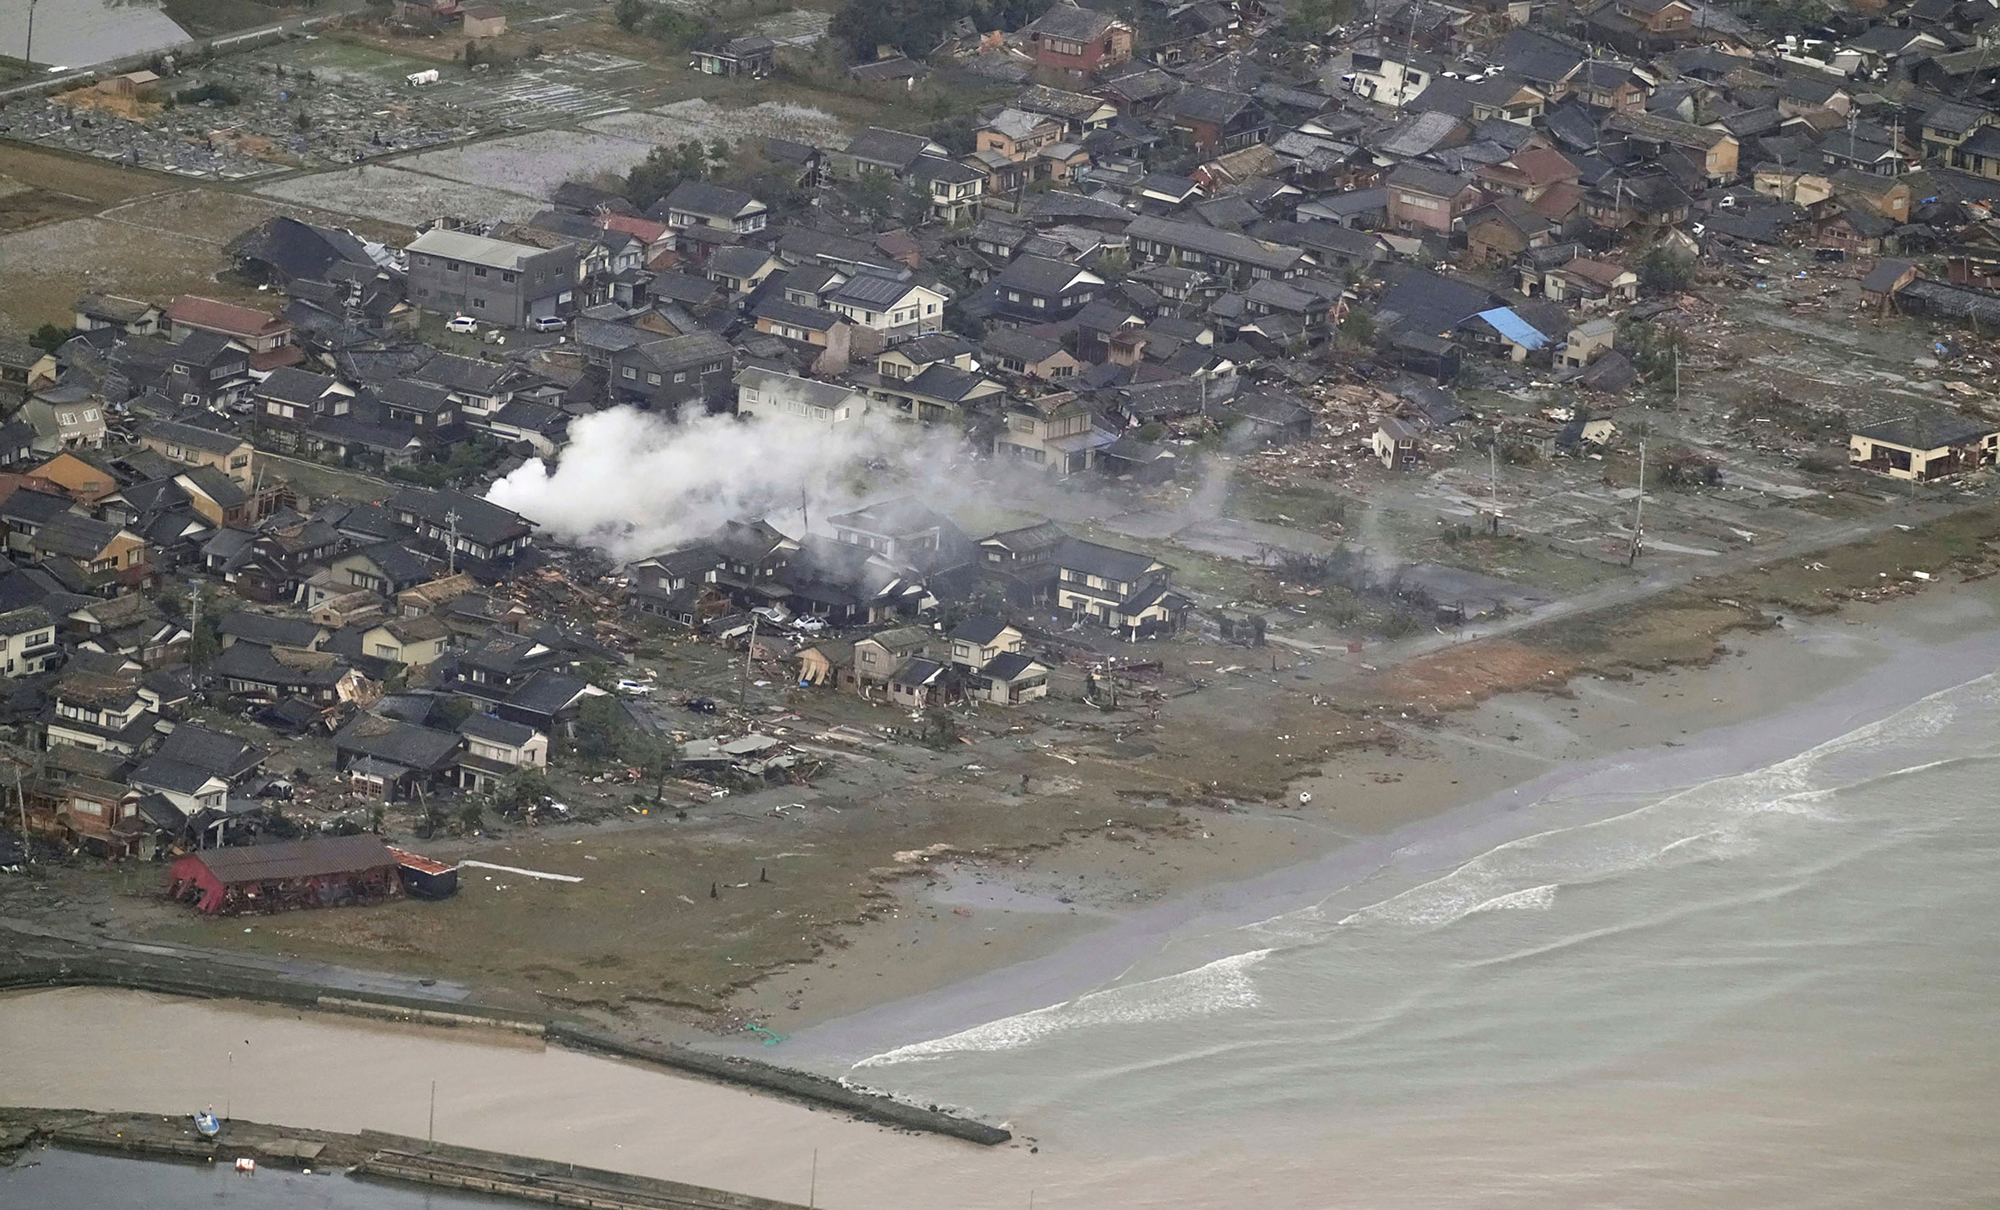 An area affected by the earthquake in Suzu, Ishikawa prefecture, Japan, on January 2.